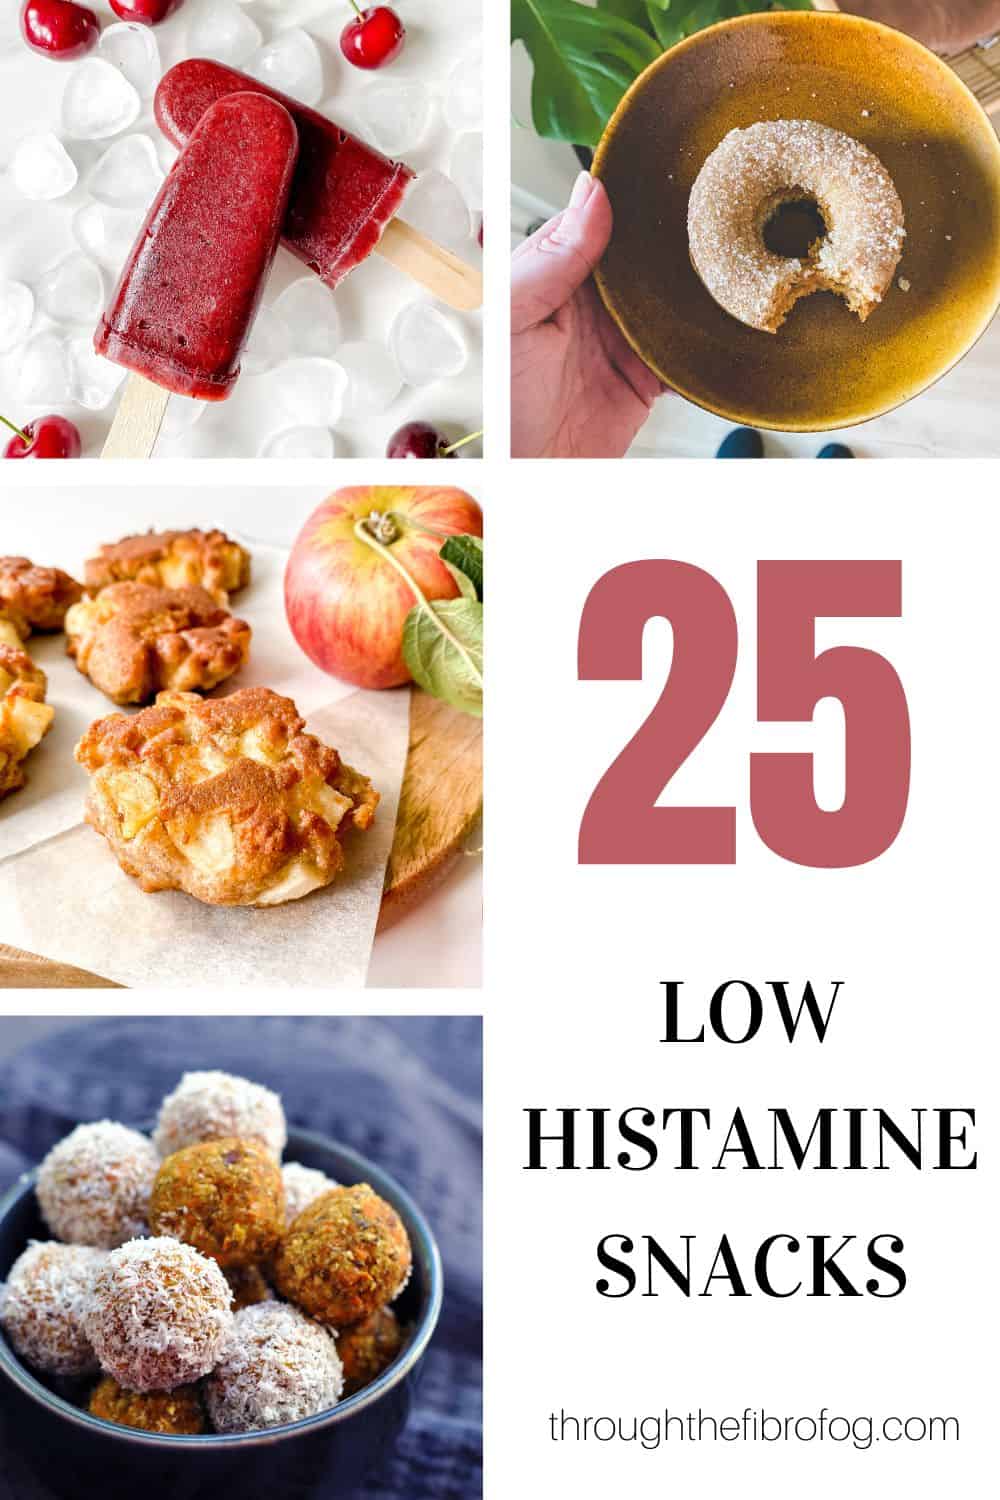 labelled 25 low histamine snacks with images of popsicles, donut, fritters and energy balls.